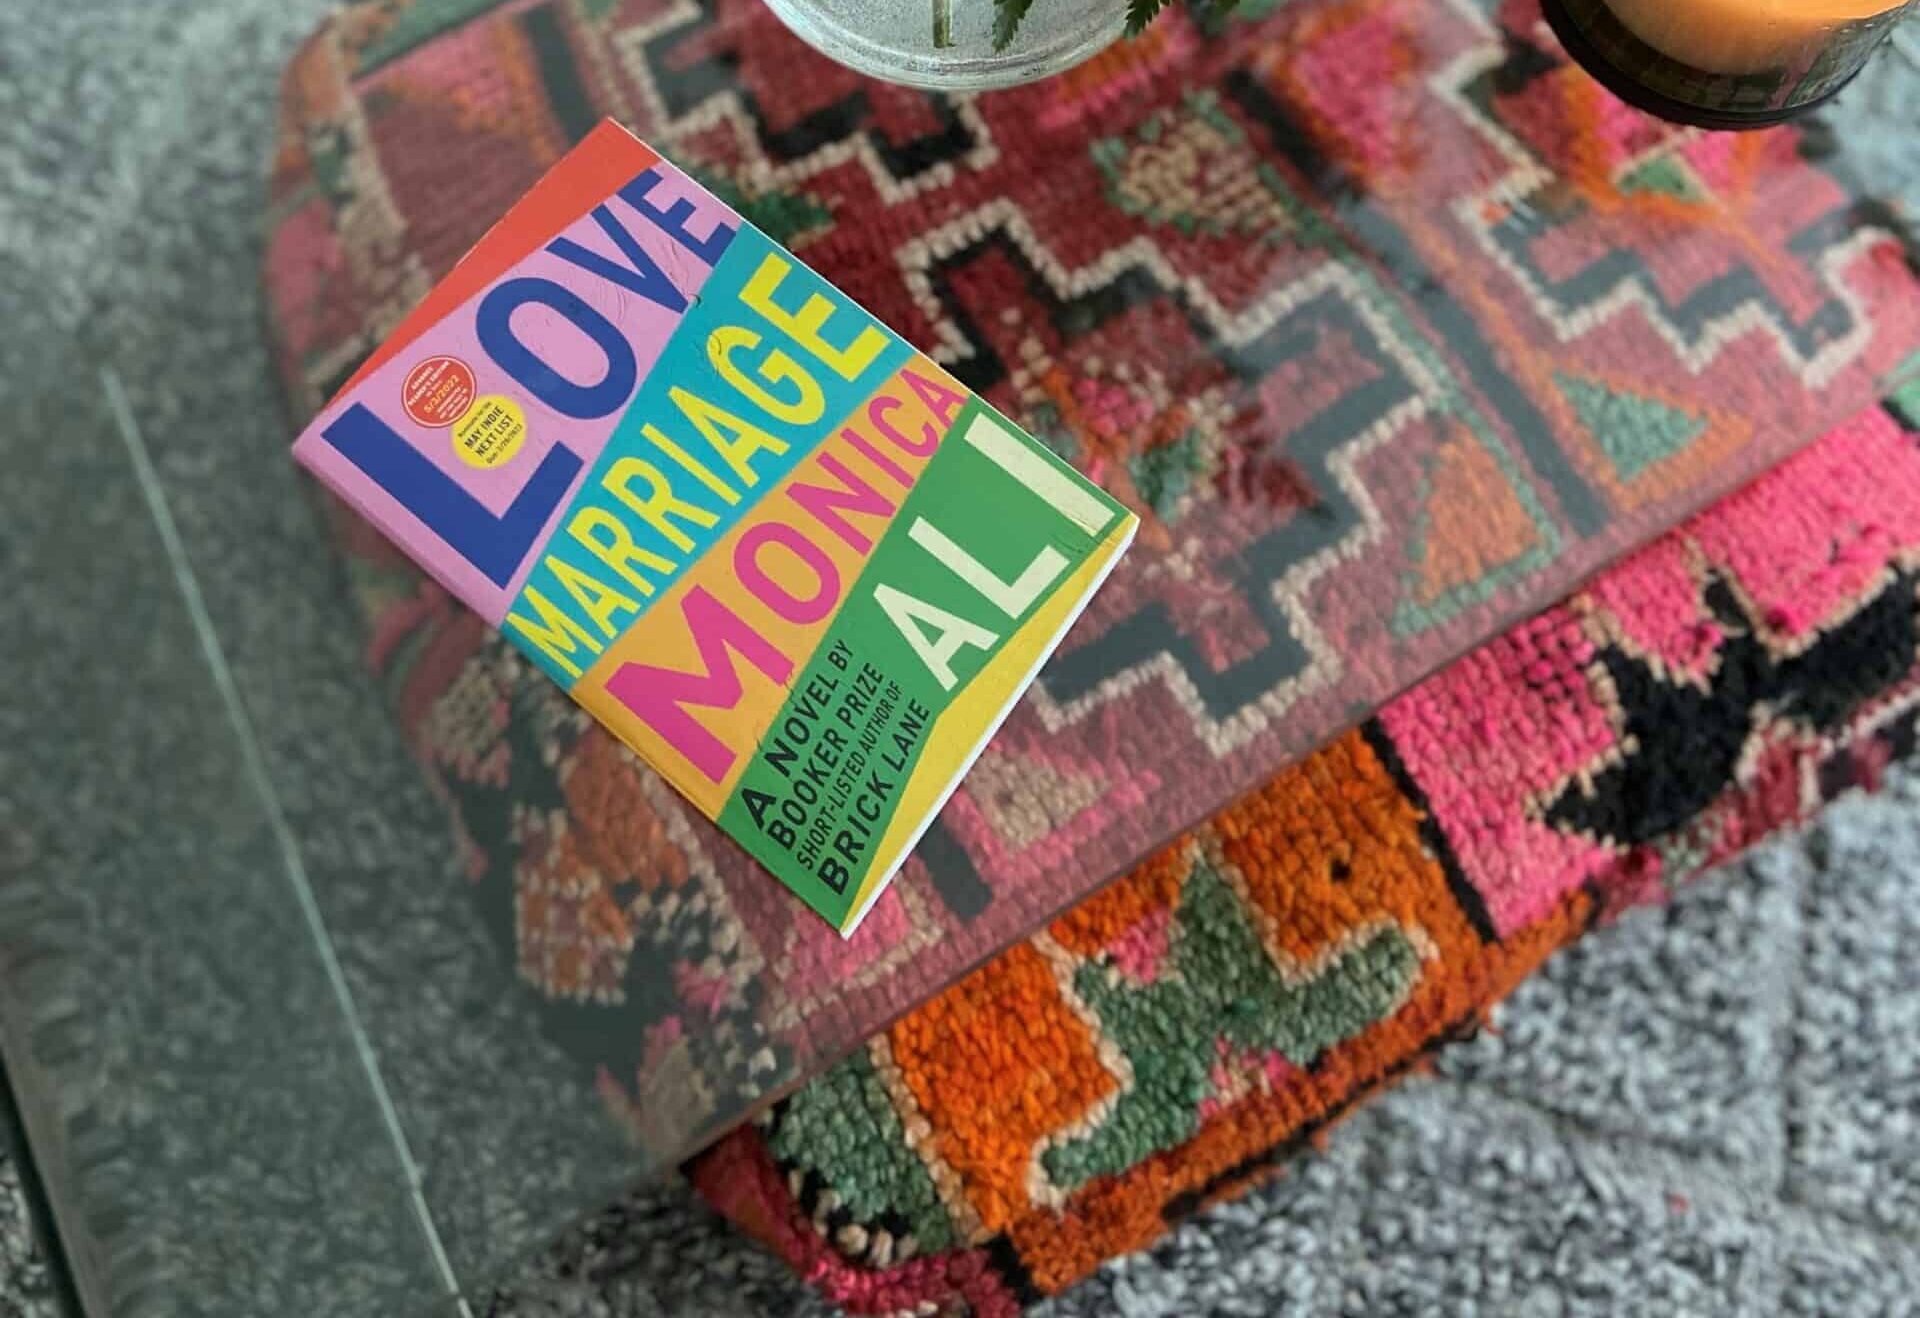 Love Marriage by Monica Ali placed on a table next to a candle and flower arrangement